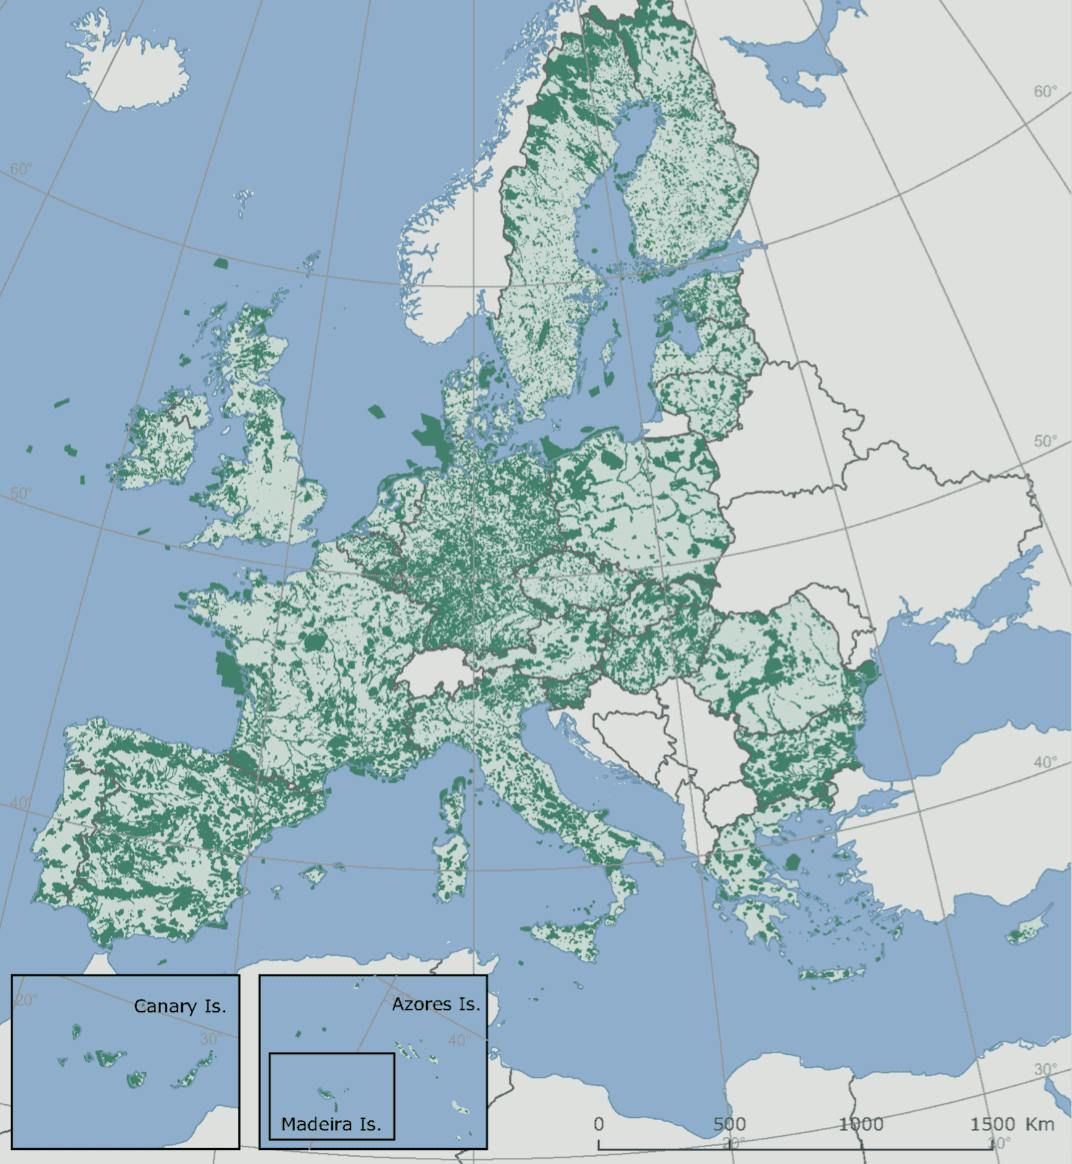 The Natura 2000 network in Europe